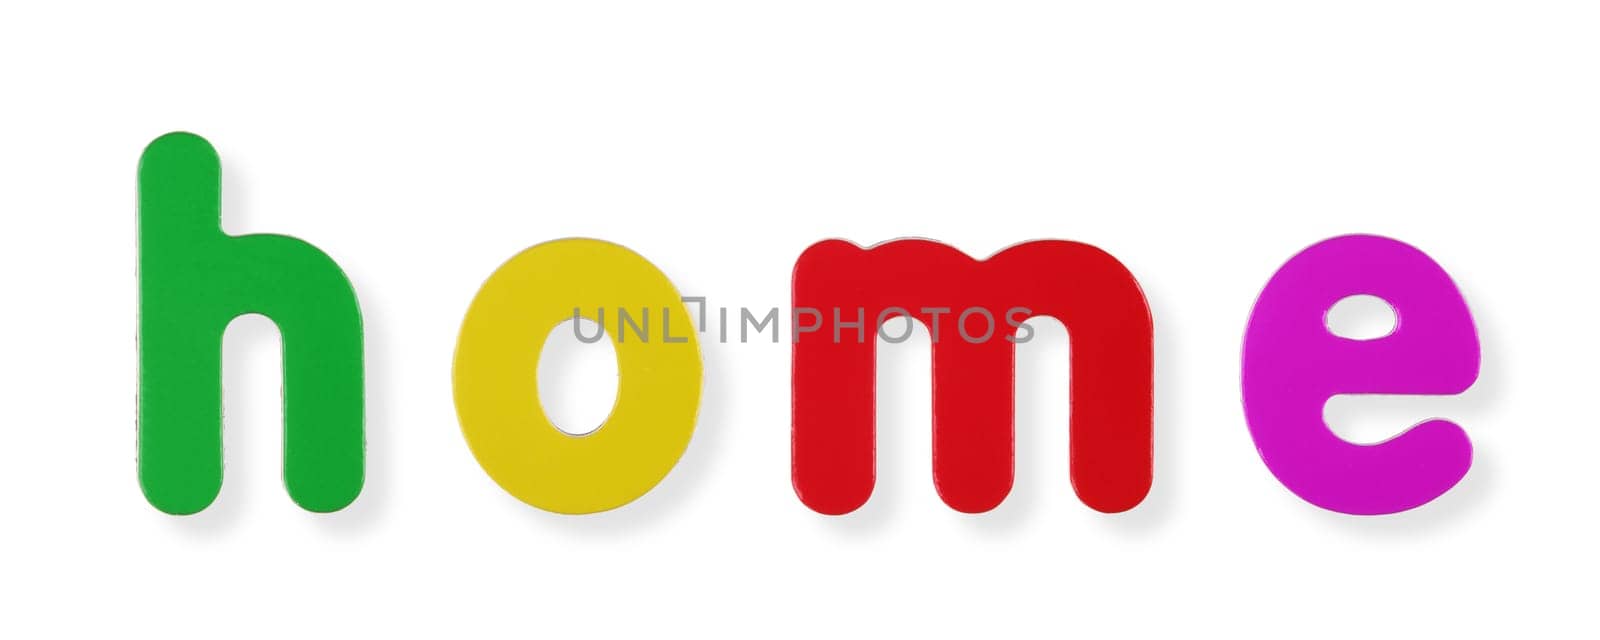 A home word in coloured magnetic letters on white with clipping path to remove shadow